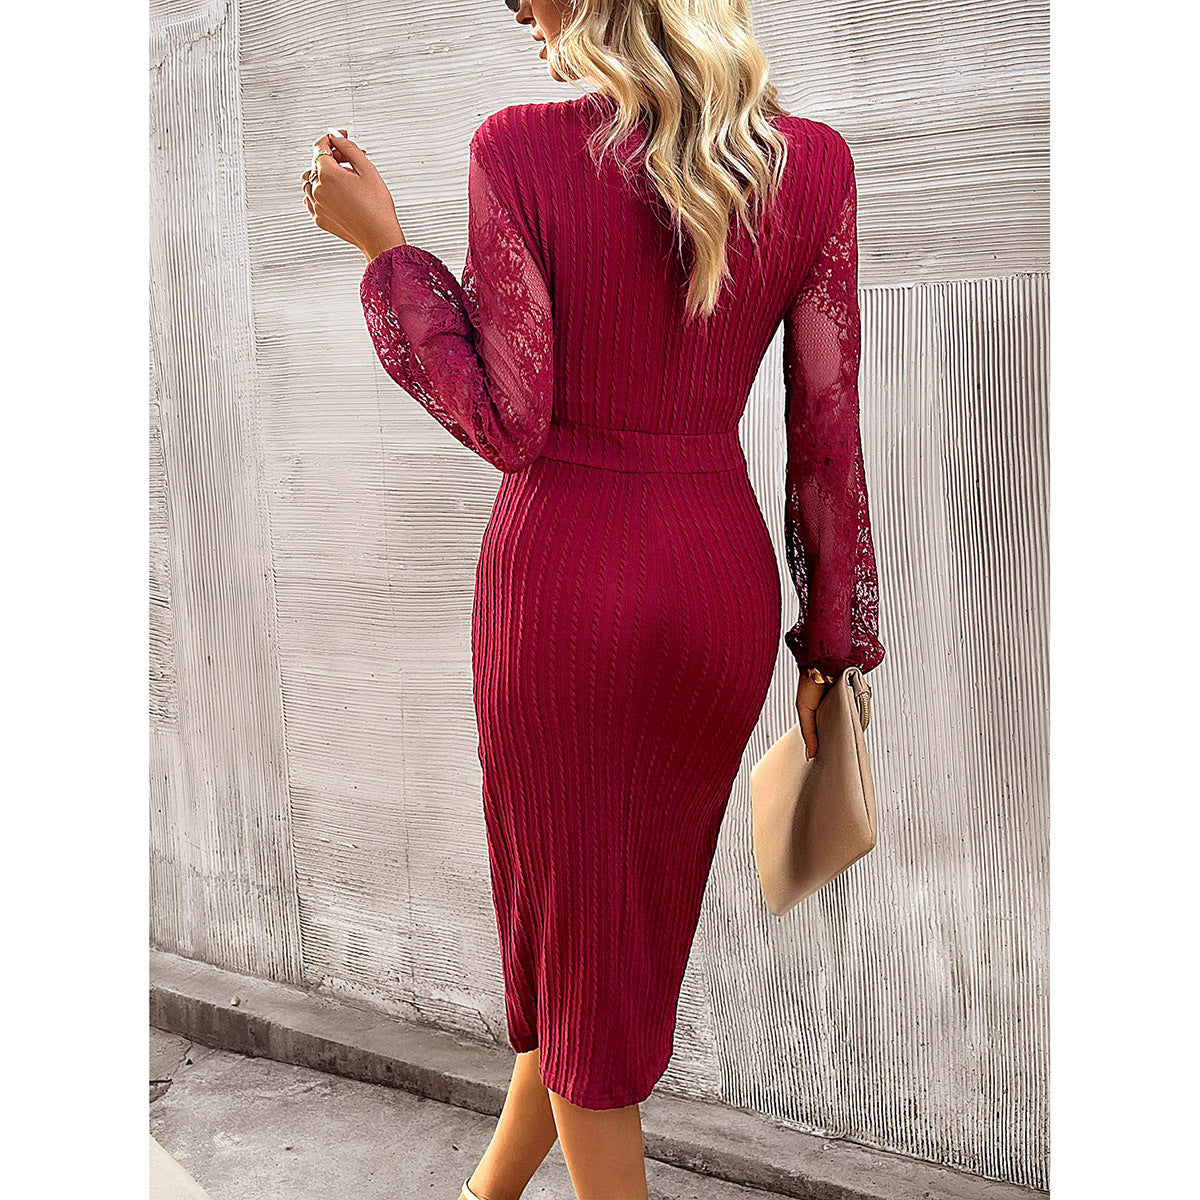 Women's Fashion V-neck Slit Lace And Knitted Long-sleeved Dress